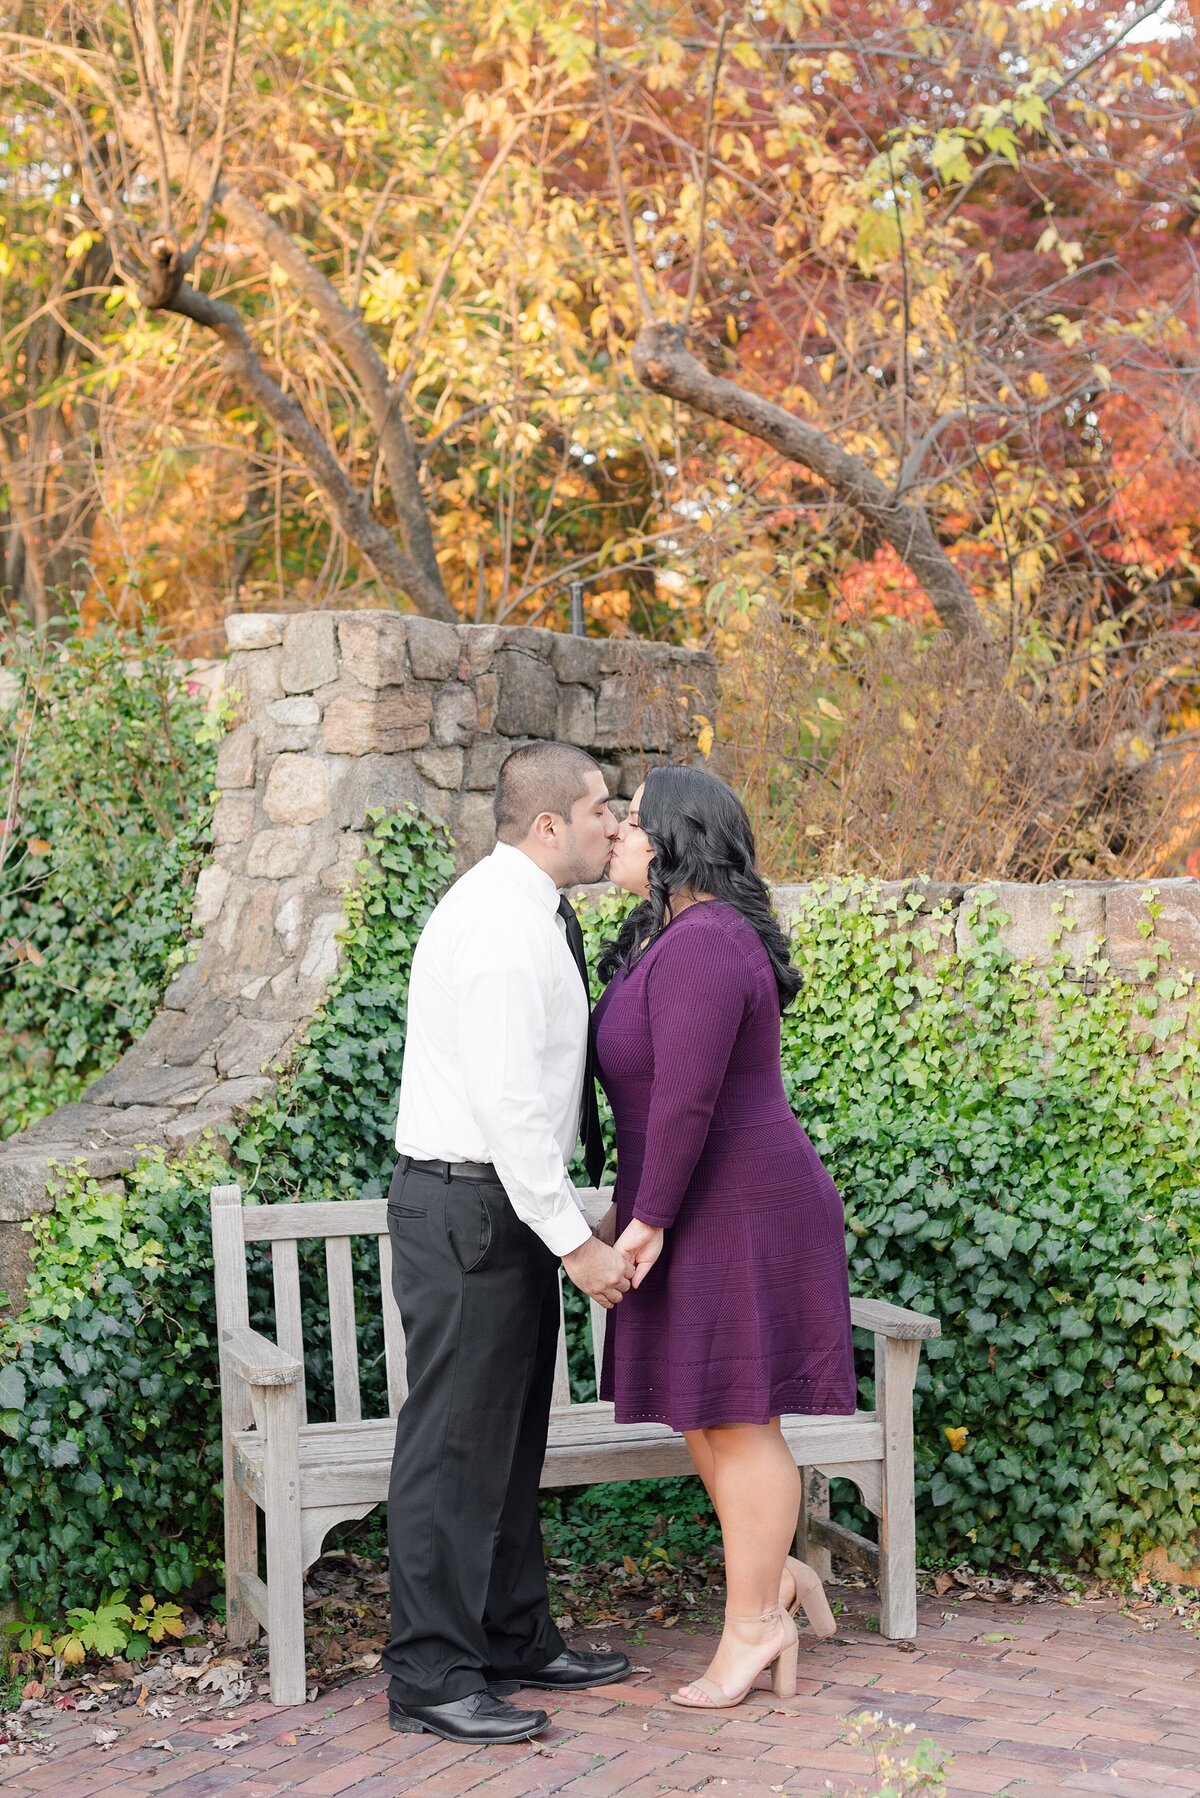 23_couple-kisses-in-autumn-gardens-full-of-color_1061